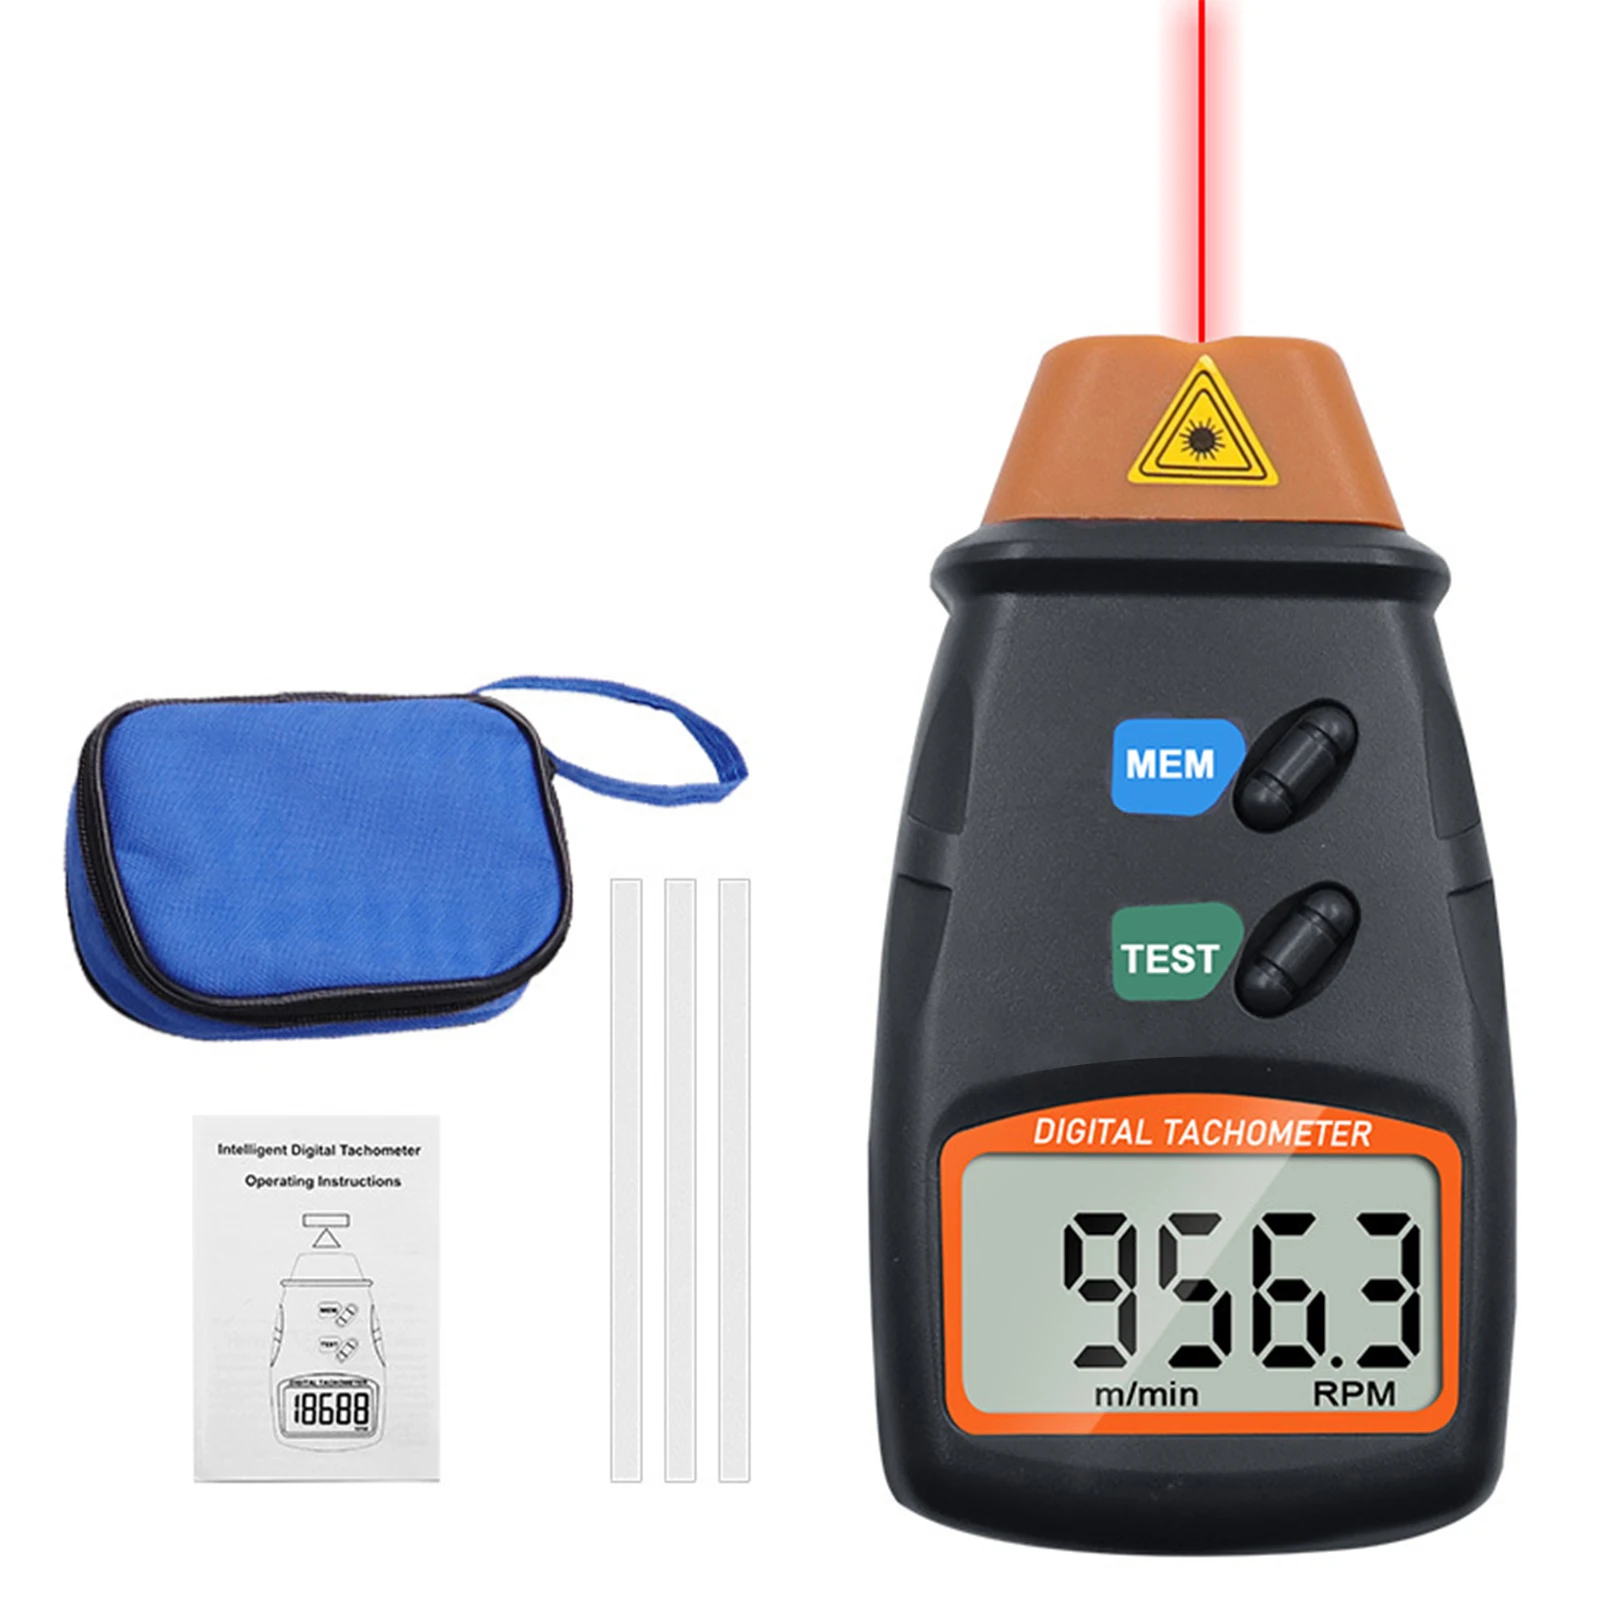 

Handheld Digital Tachometer 2.5-99999RPM Non-contact Laser Rotation Speed Meter with Cloth Bag for Motors Fans